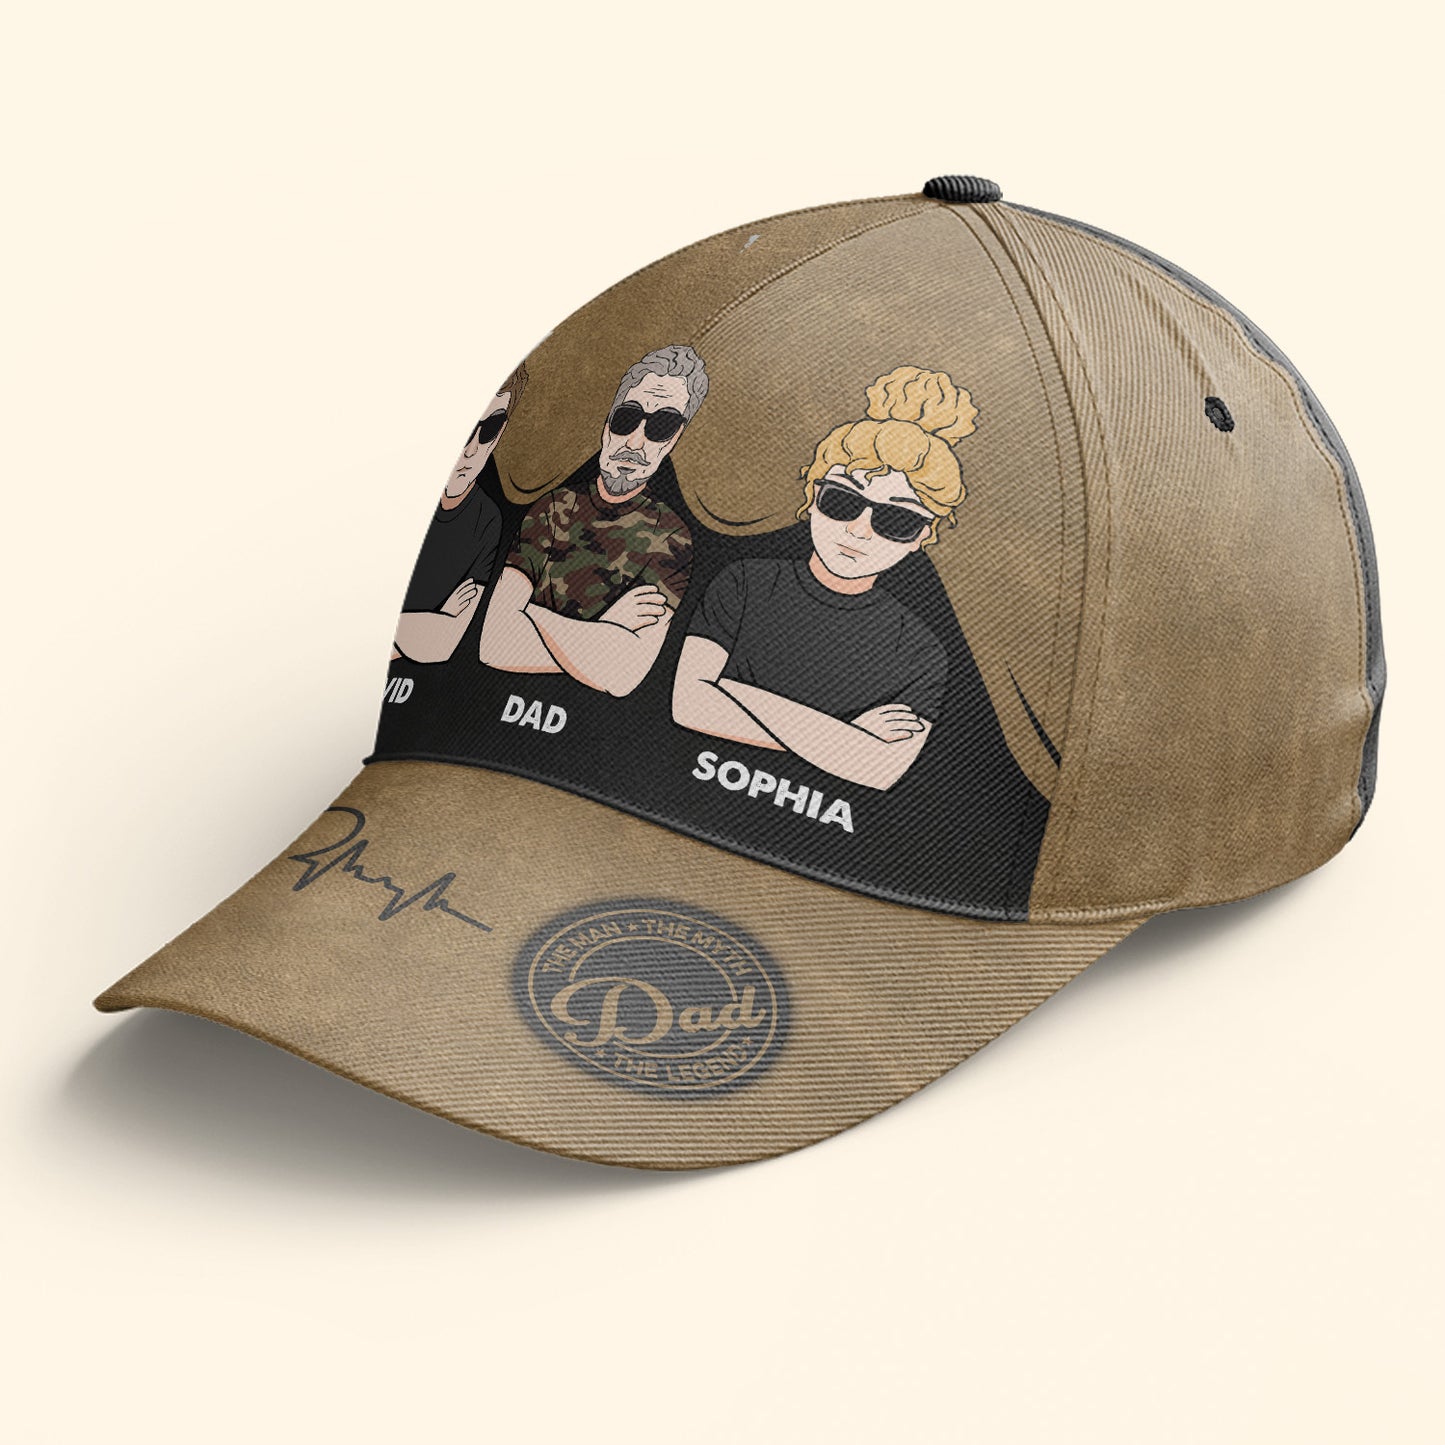 The Man The Myth The Legend Dad - Personalized Classic Cap